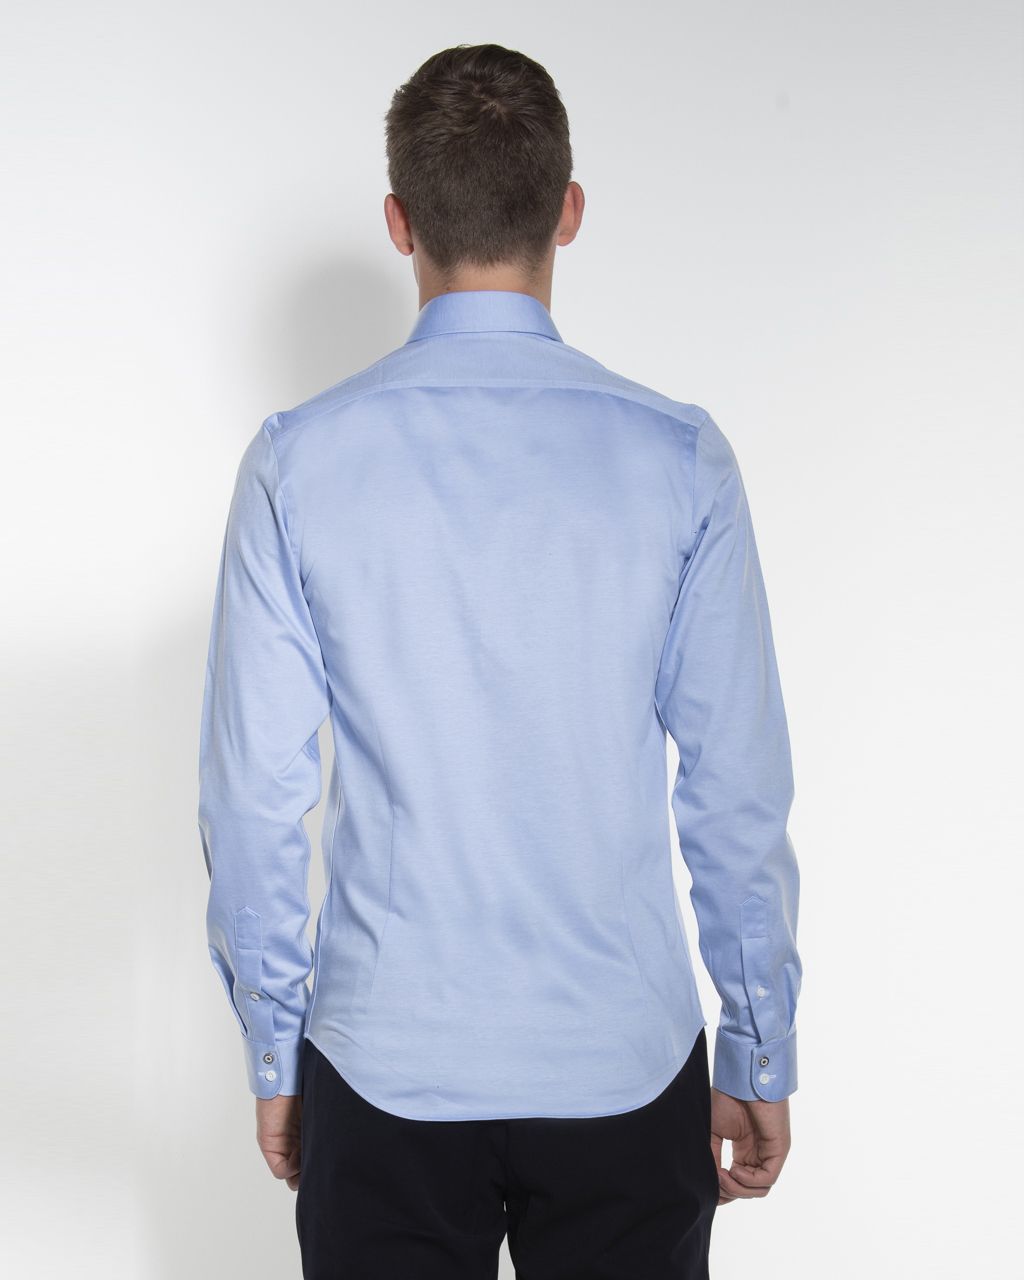 Blue Industry Casual Overhemd LM Blauw 052286-001-37